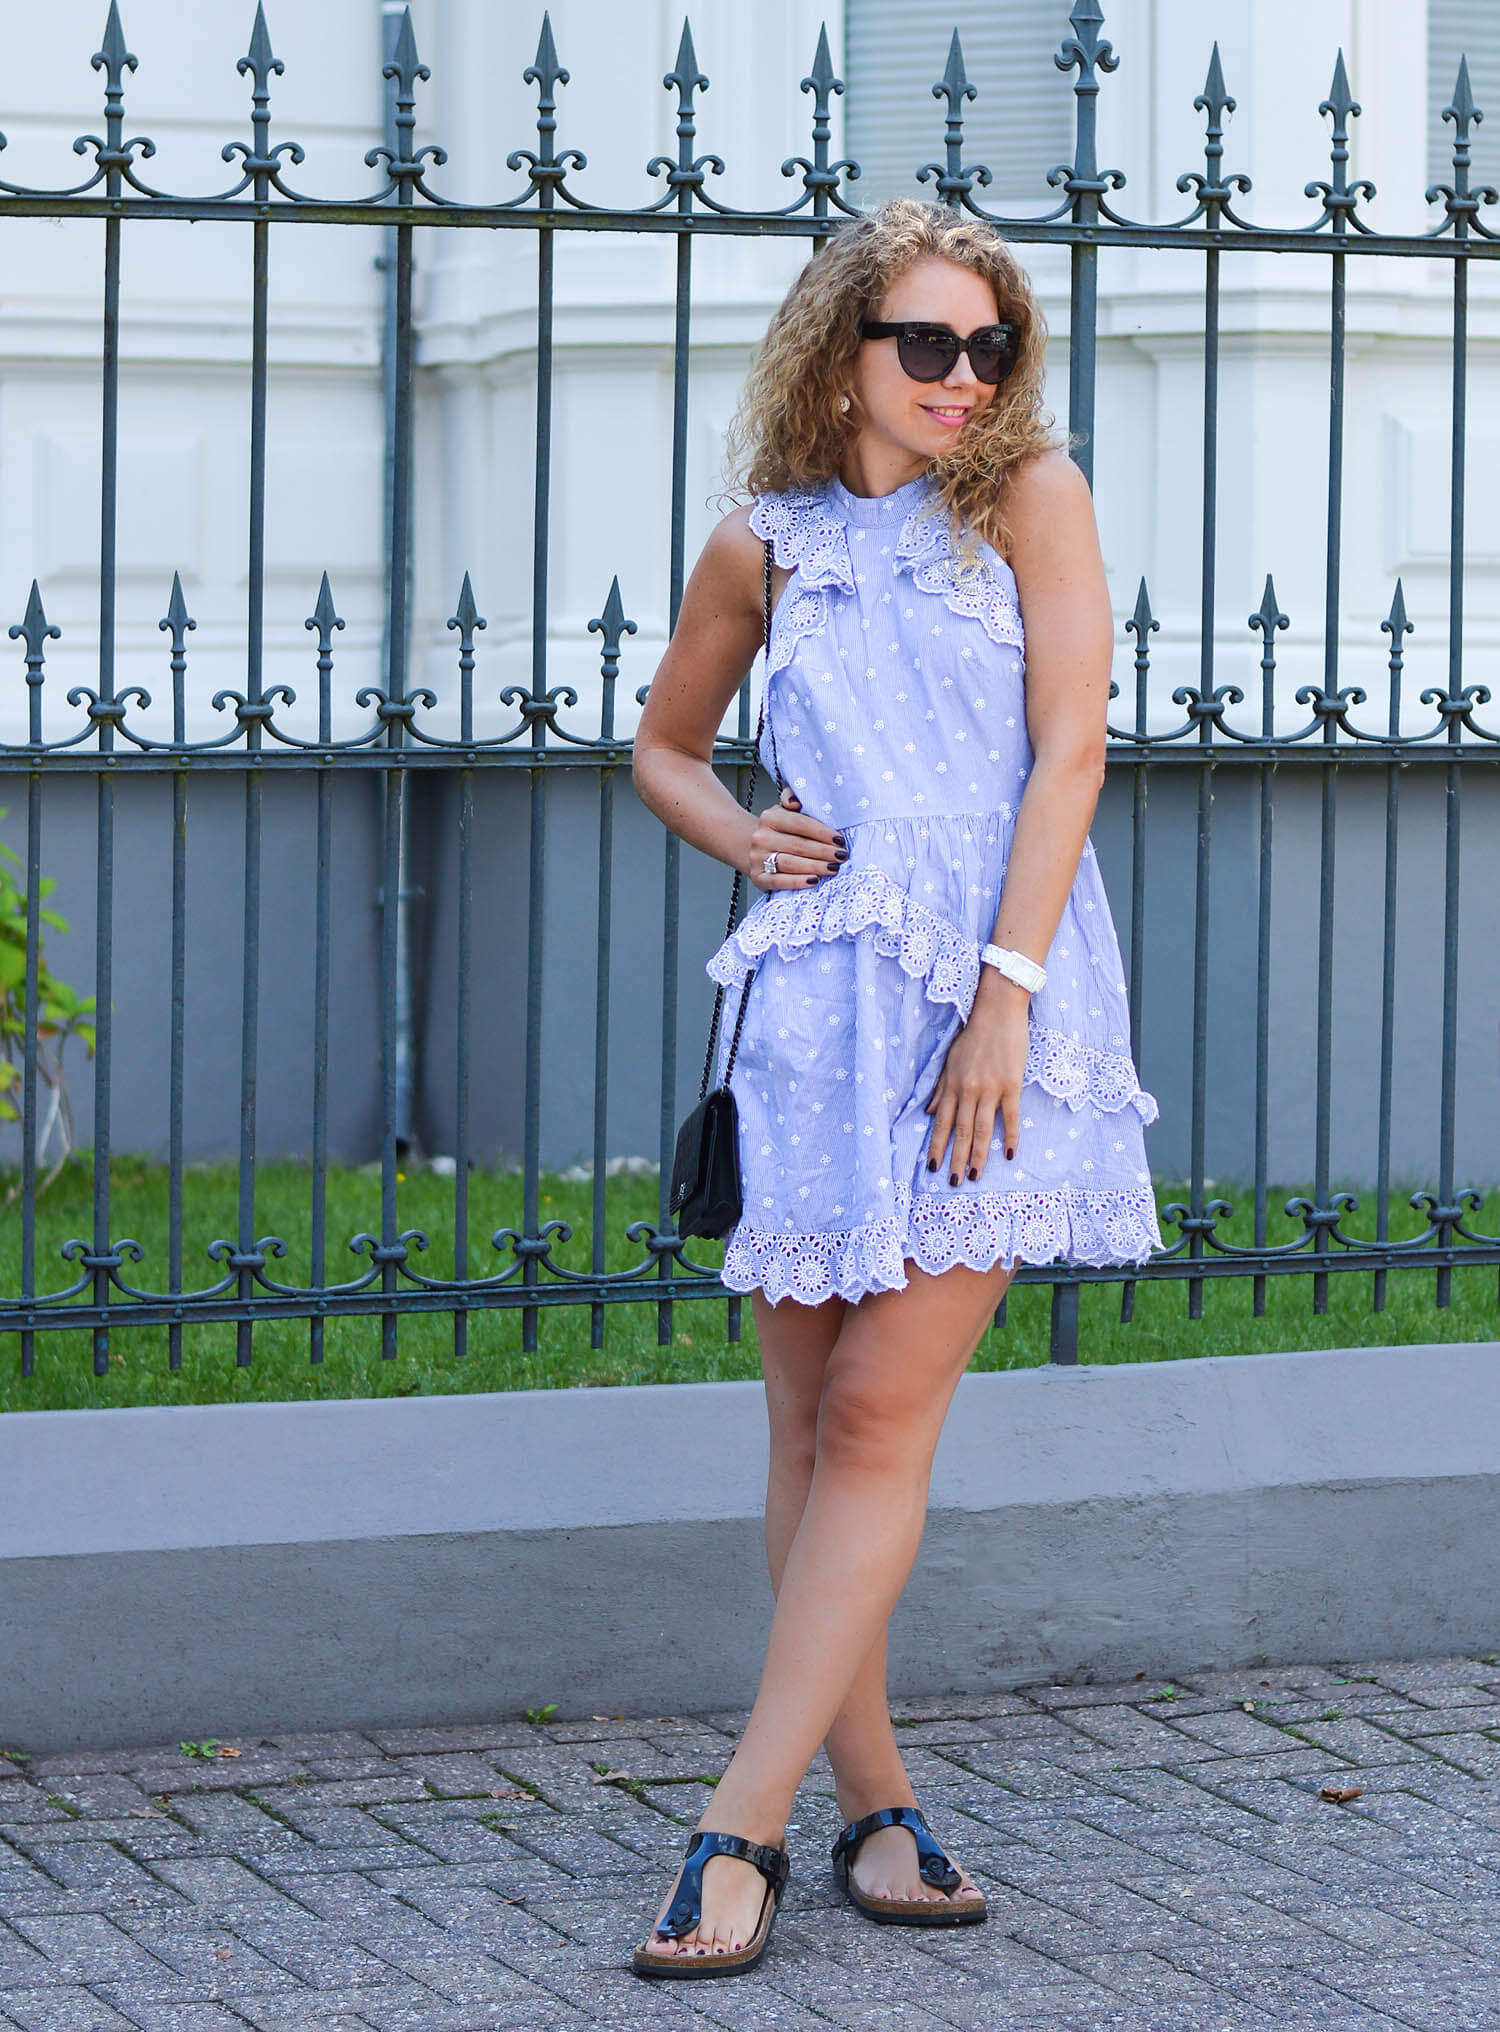 kationette-fashionblog-nrw-Outfit-H&M-trend-dress-broderie-anglaise-volants